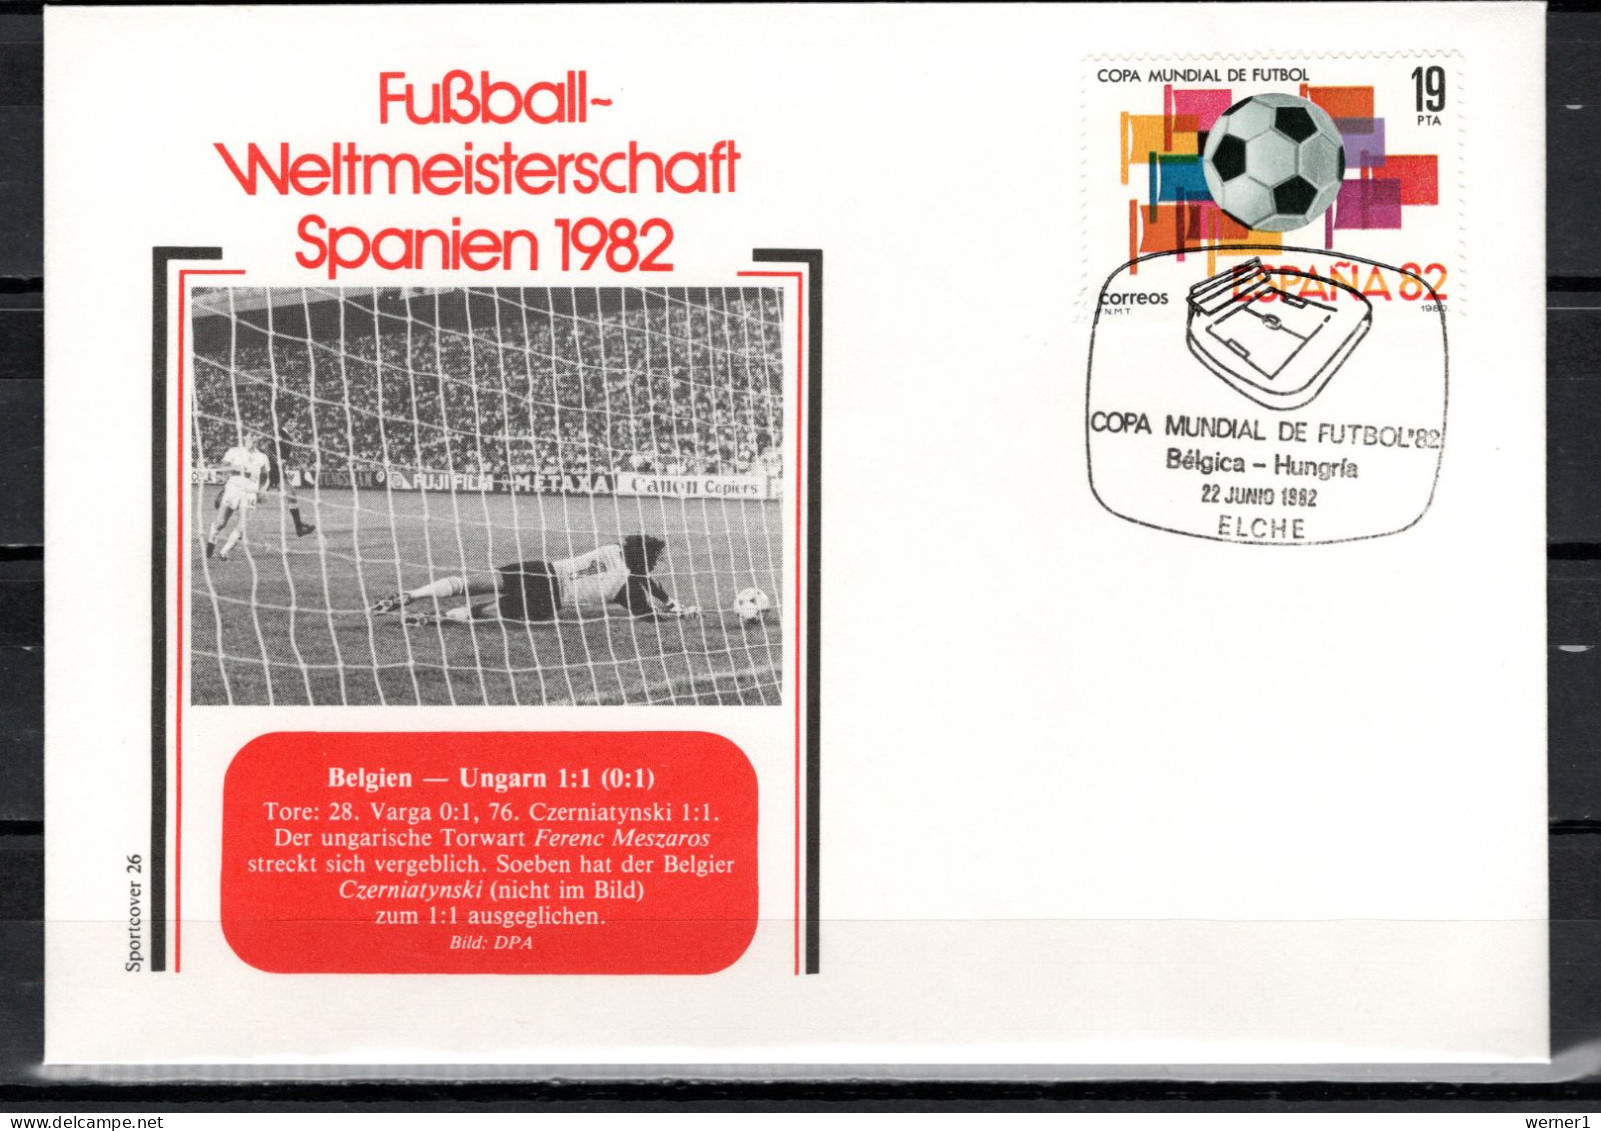 Spain 1982 Football Soccer World Cup Commemorative Cover Match Belgium - Hungary 1:1 - 1982 – Espagne